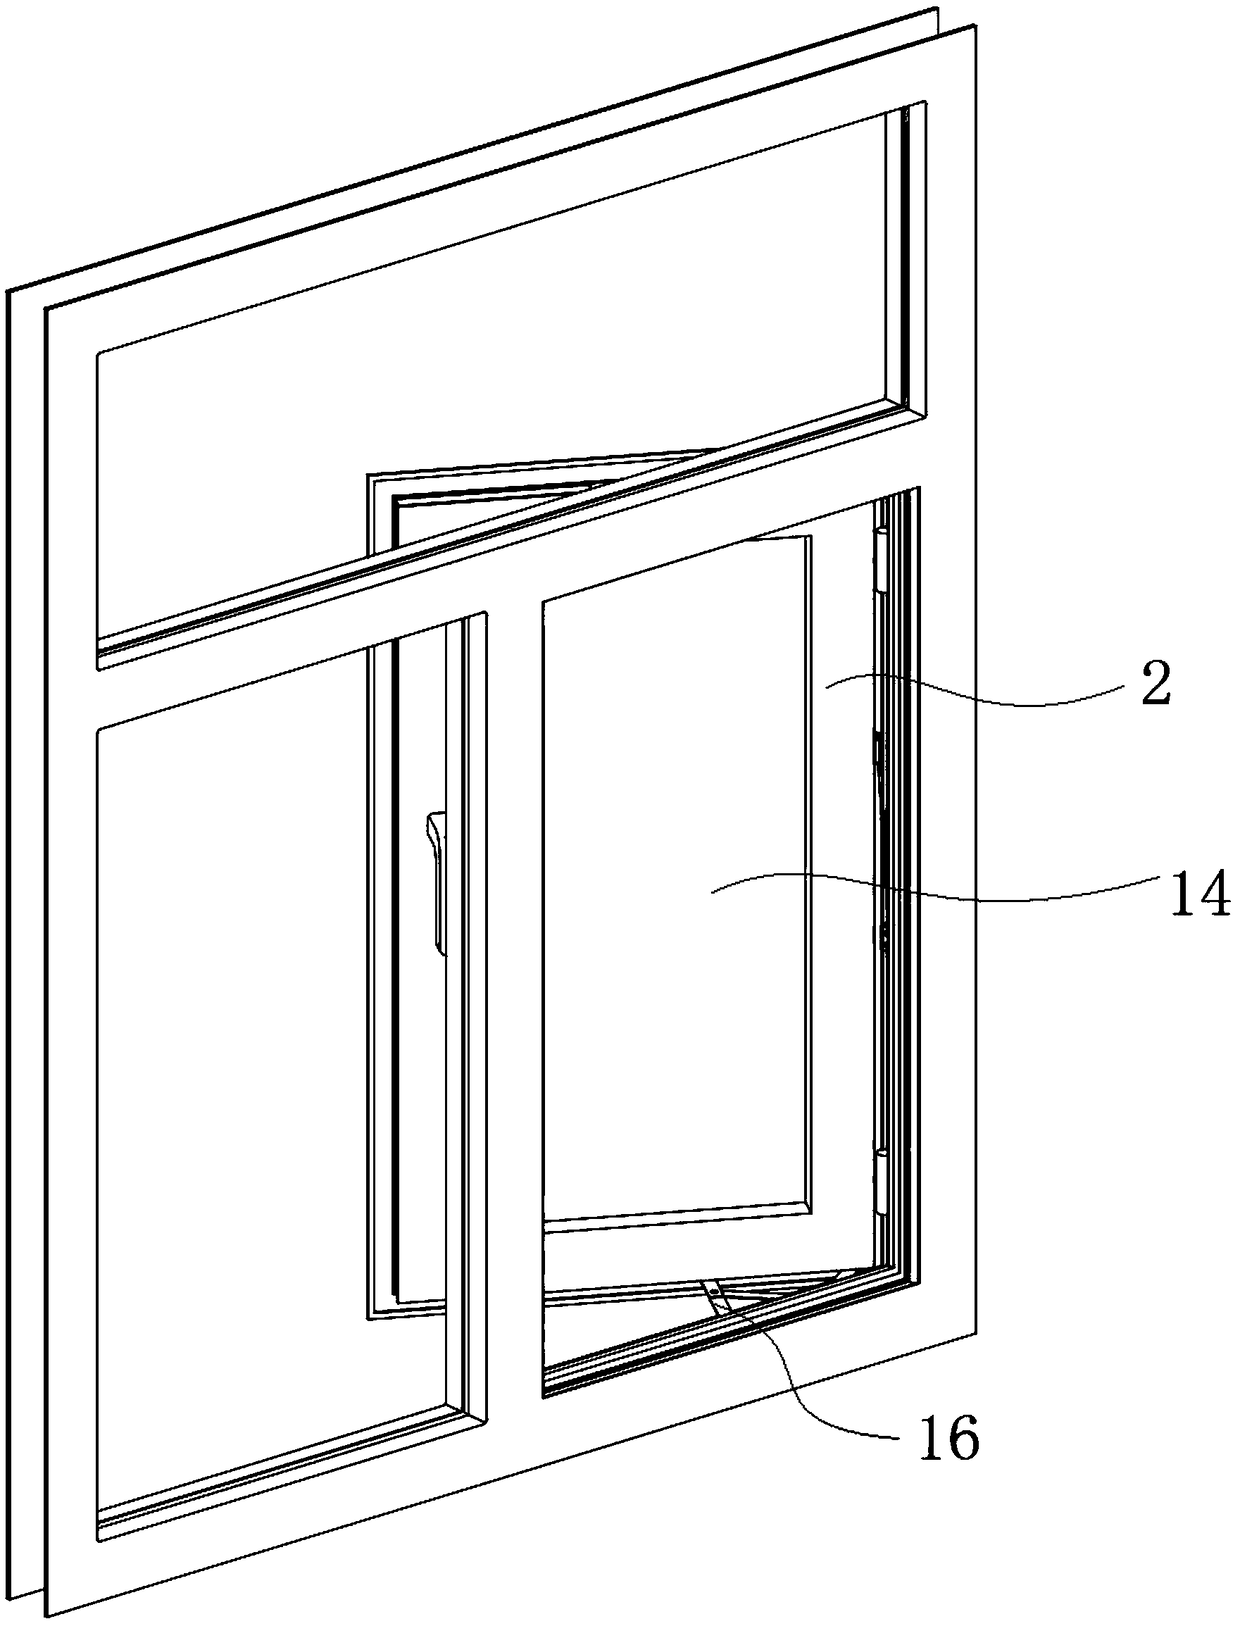 Casement window structure and sectional material with window frame and sash integrally connected in penetrating and inserted modes